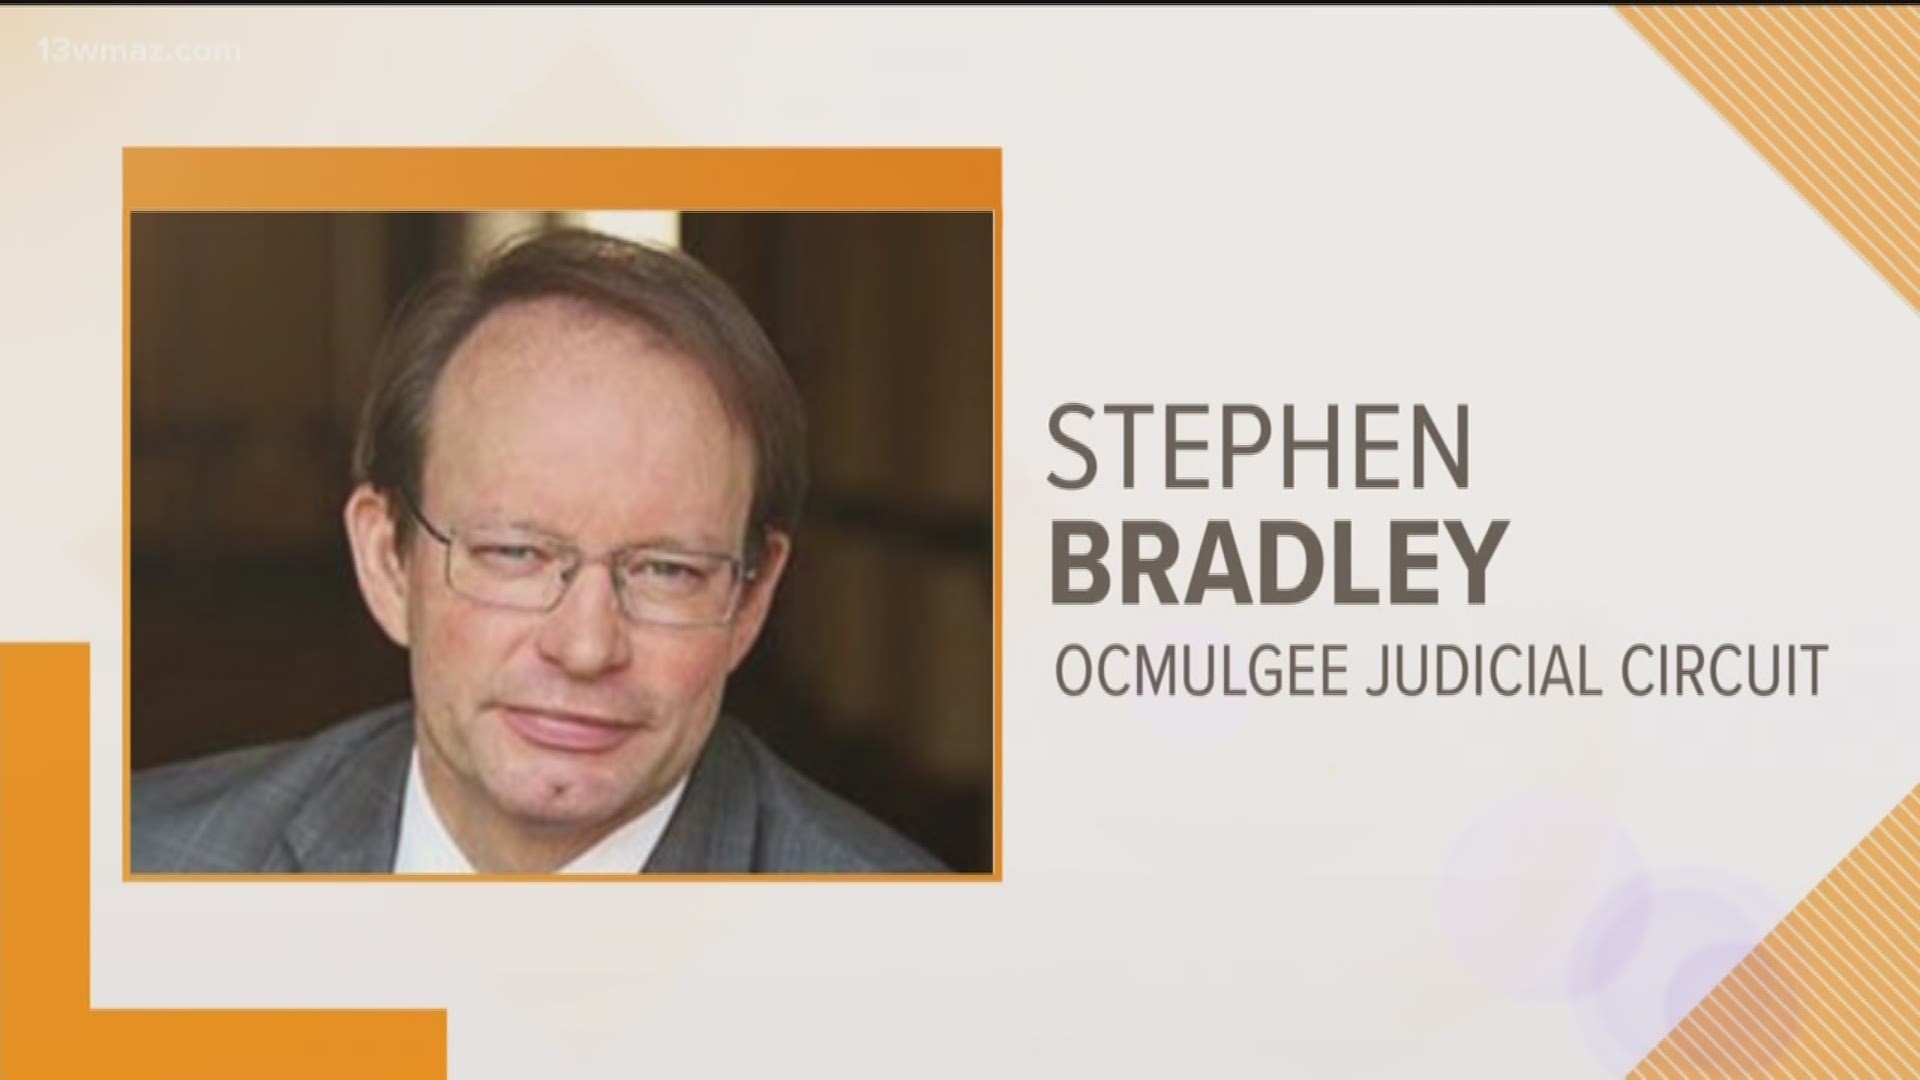 The Ocmulgee Circuit covers eight Central Georgia counties, and DA Stephen Bradley's office is prosecuting several high-profile cases